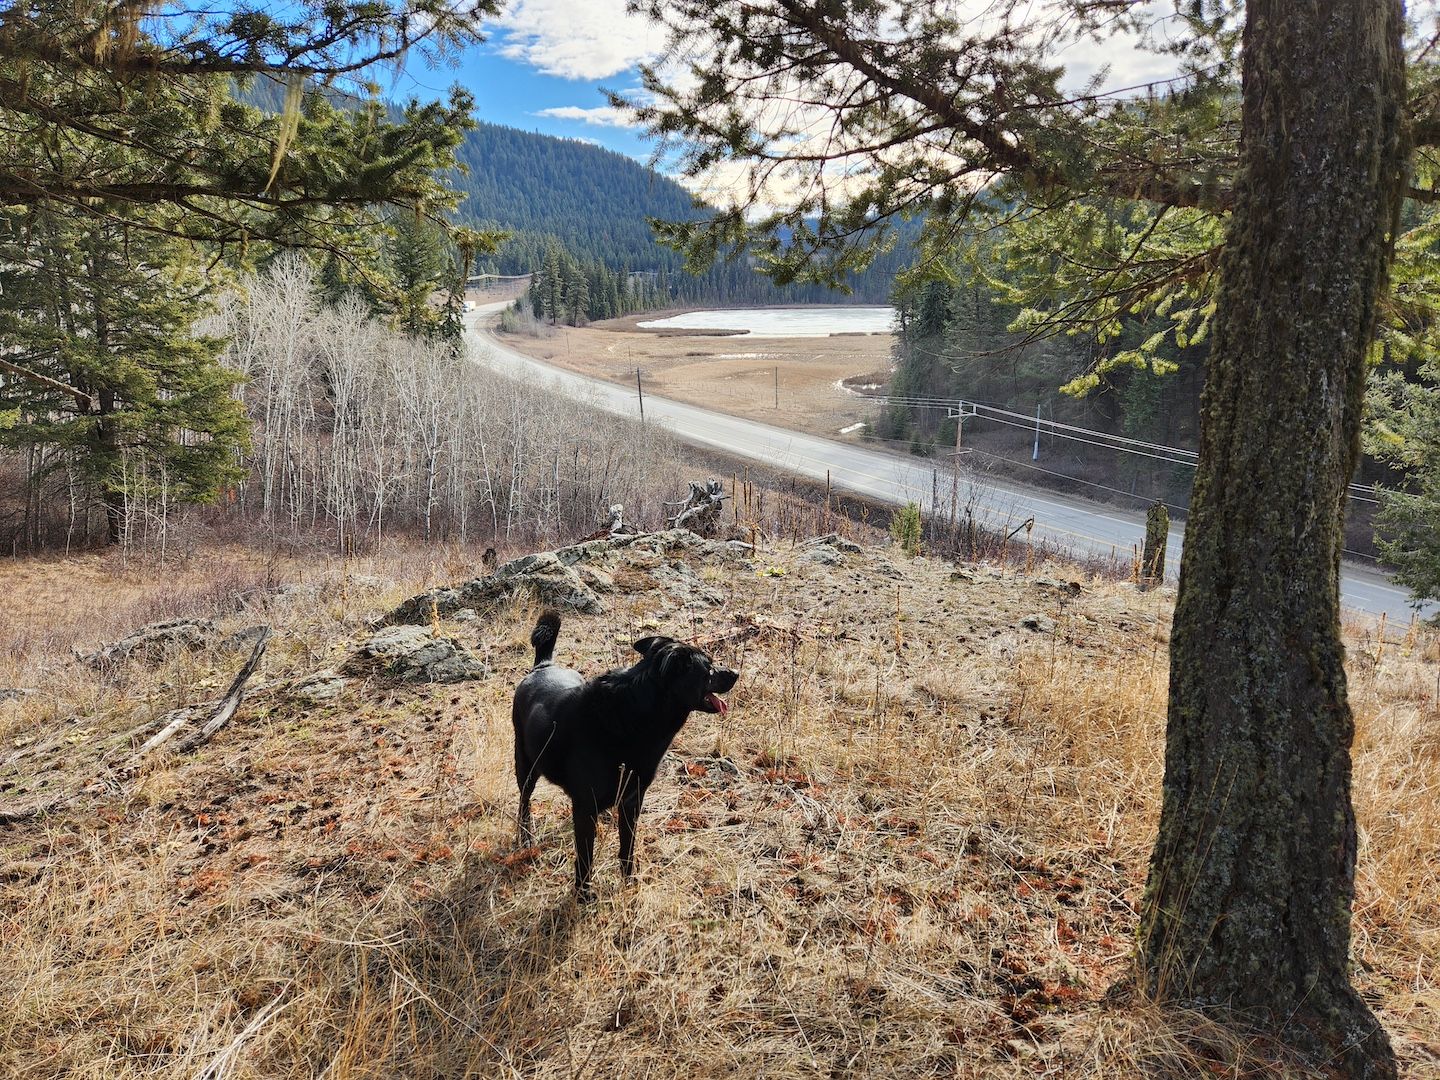 photo of a black dog on a high hill of parched grass, next to a tree, a stretch of highway seen in the distance, and a lake far off to the right